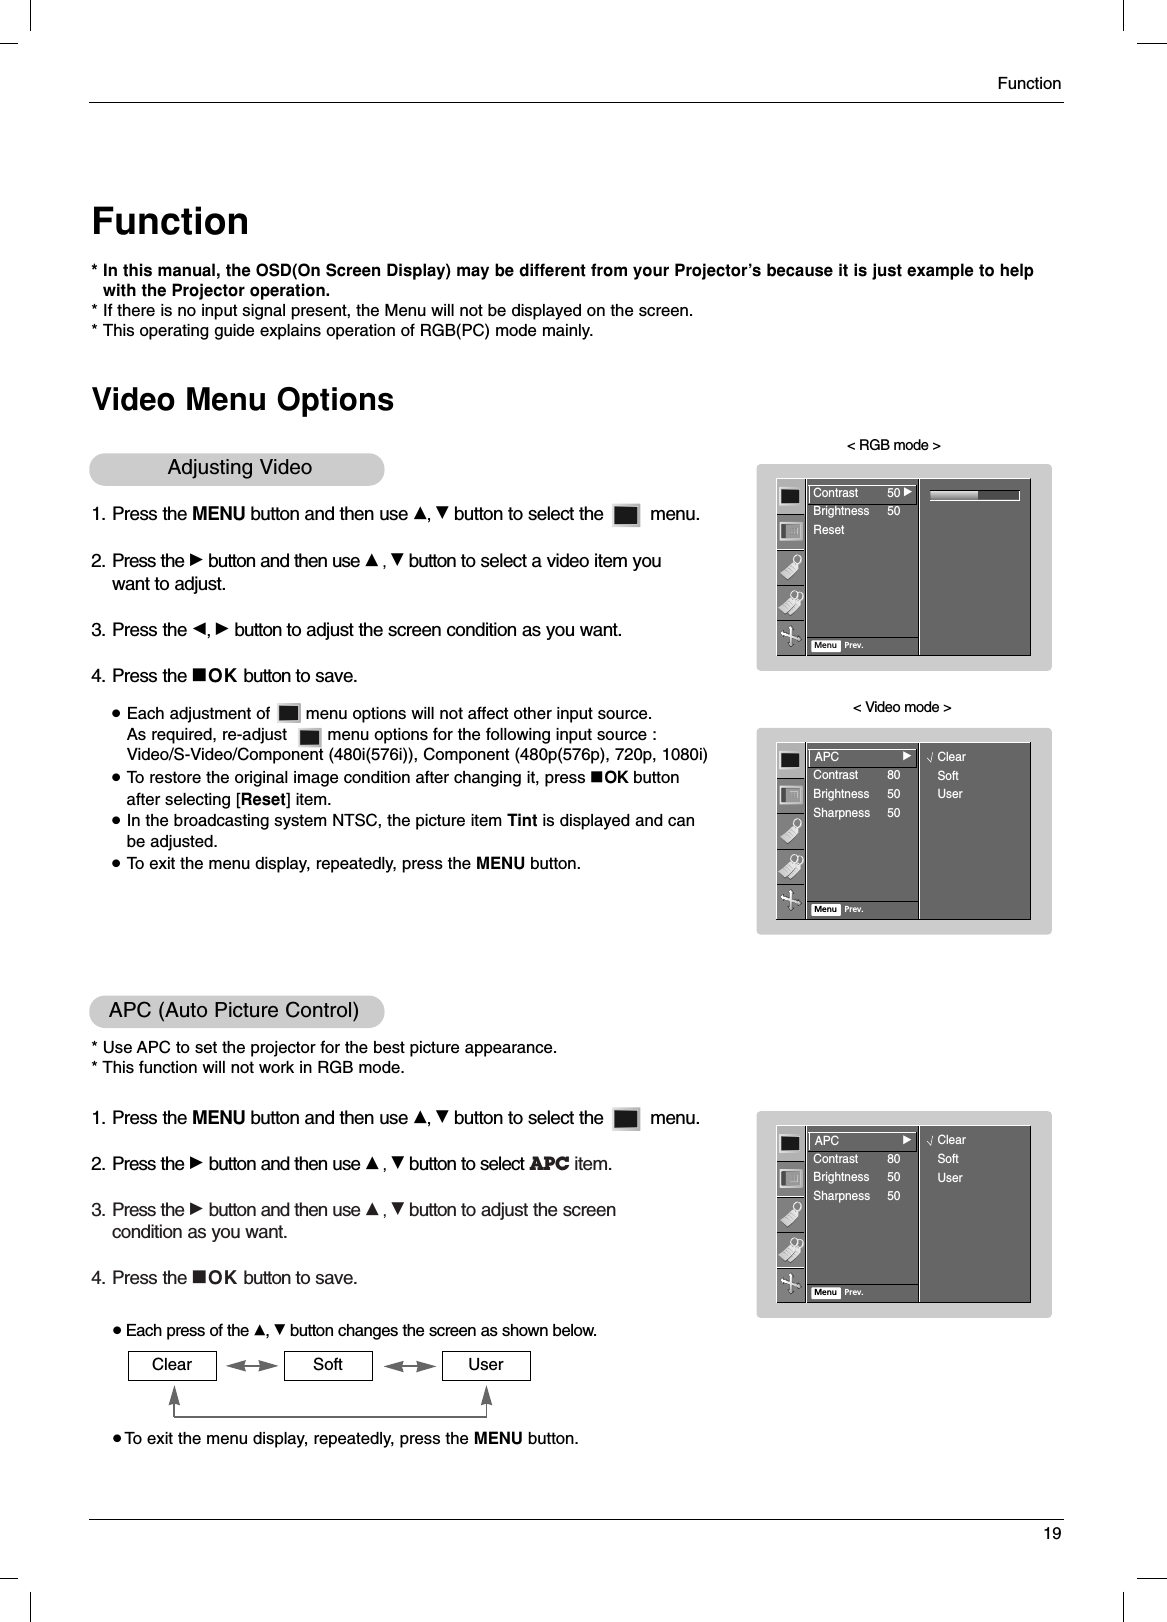 Function19FunctionVideo Menu Options* In this manual, the OSD(On Screen Display) may be different from your Projector’s because it is just example to help with the Projector operation.* If there is no input signal present, the Menu will not be displayed on the screen.* This operating guide explains operation of RGB(PC) mode mainly.1. Press the MENU button and then use D, Ebutton to select the         menu.2. Press the Gbutton and then use D, Ebutton to select a video item you want to adjust.3. Press the F, Gbutton to adjust the screen condition as you want.4. Press the AOK button to save.&lt; RGB mode &gt;&lt; Video mode &gt;●Each adjustment of       menu options will not affect other input source. As required, re-adjust        menu options for the following input source : Video/S-Video/Component (480i(576i)), Component (480p(576p), 720p, 1080i)●To restore the original image condition after changing it, press AOK button after selecting [Reset] item.●In the broadcasting system NTSC, the picture item Tint is displayed and can be adjusted.●To exit the menu display, repeatedly, press the MENU button.Adjusting Video 1. Press the MENU button and then use D, Ebutton to select the         menu.2. Press the Gbutton and then use D, Ebutton to select APC item.3. Press the Gbutton and then use D, Ebutton to adjust the screencondition as you want.4. Press the AOK button to save.APC (Auto Picture Control)* Use APC to set the projector for the best picture appearance.* This function will not work in RGB mode.●Each press of the D, Ebutton changes the screen as shown below.● To exit the menu display, repeatedly, press the MENU button.Clear Soft UserContrast 50Brightness 50ResetMenu Prev.Contrast 50GAPCContrast 80Brightness 50Sharpness 50Menu Prev.APCGClearSoftUserAPCContrast 80Brightness 50Sharpness 50Menu Prev.APCGClearSoftUser